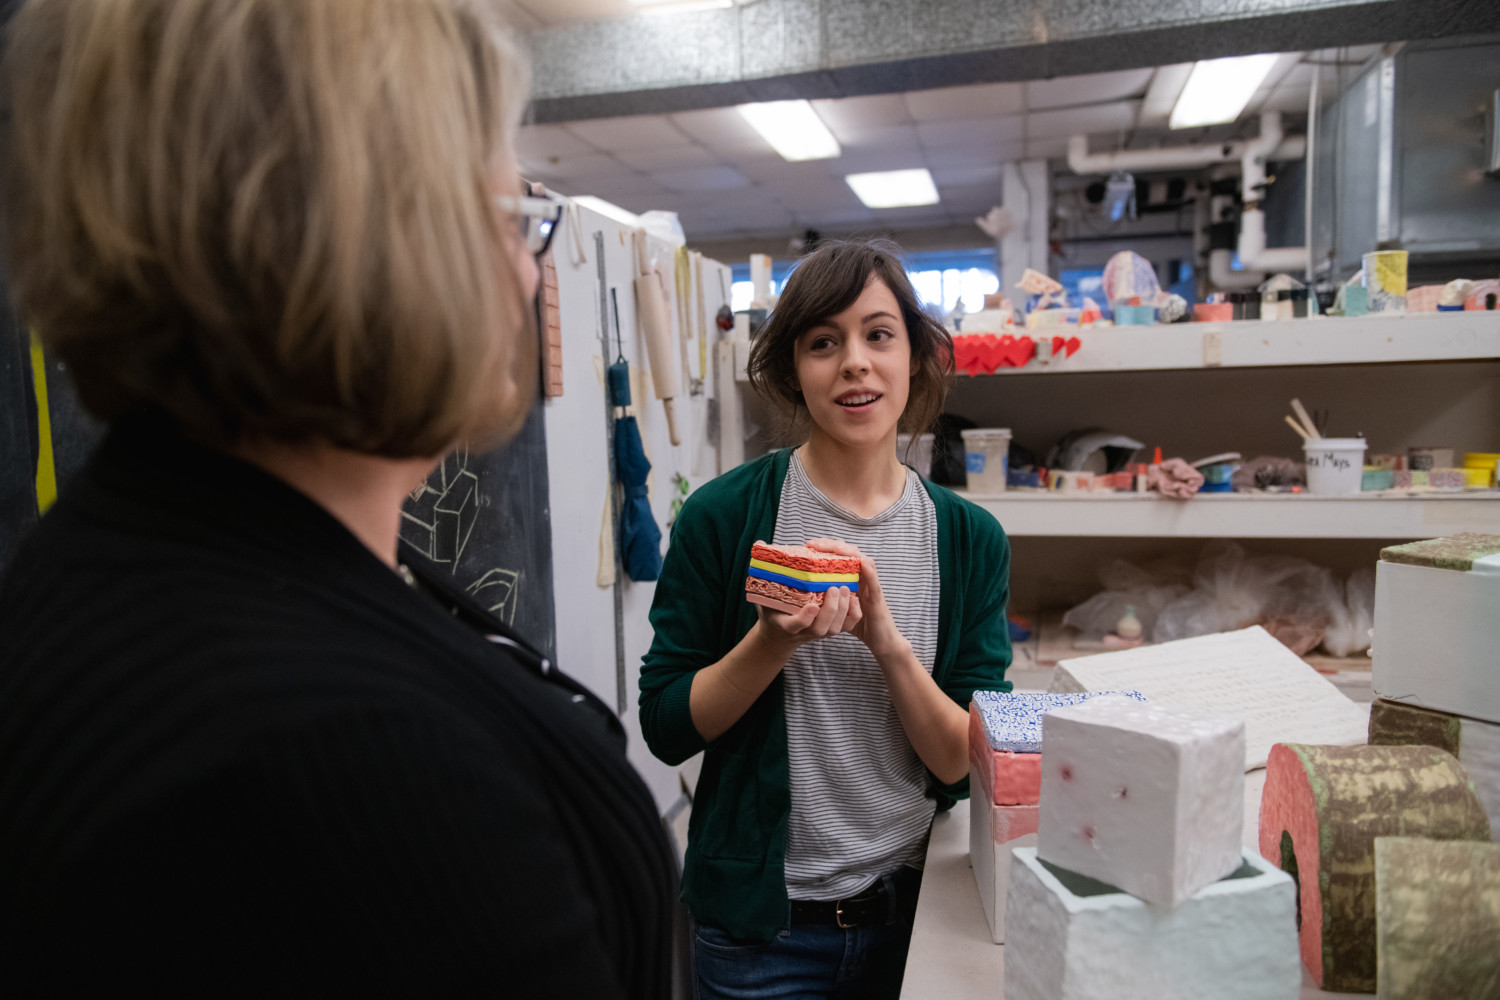 Sara Mays stands in her art studio, surrounded by ceramics work, talking to Valerie Zimany.